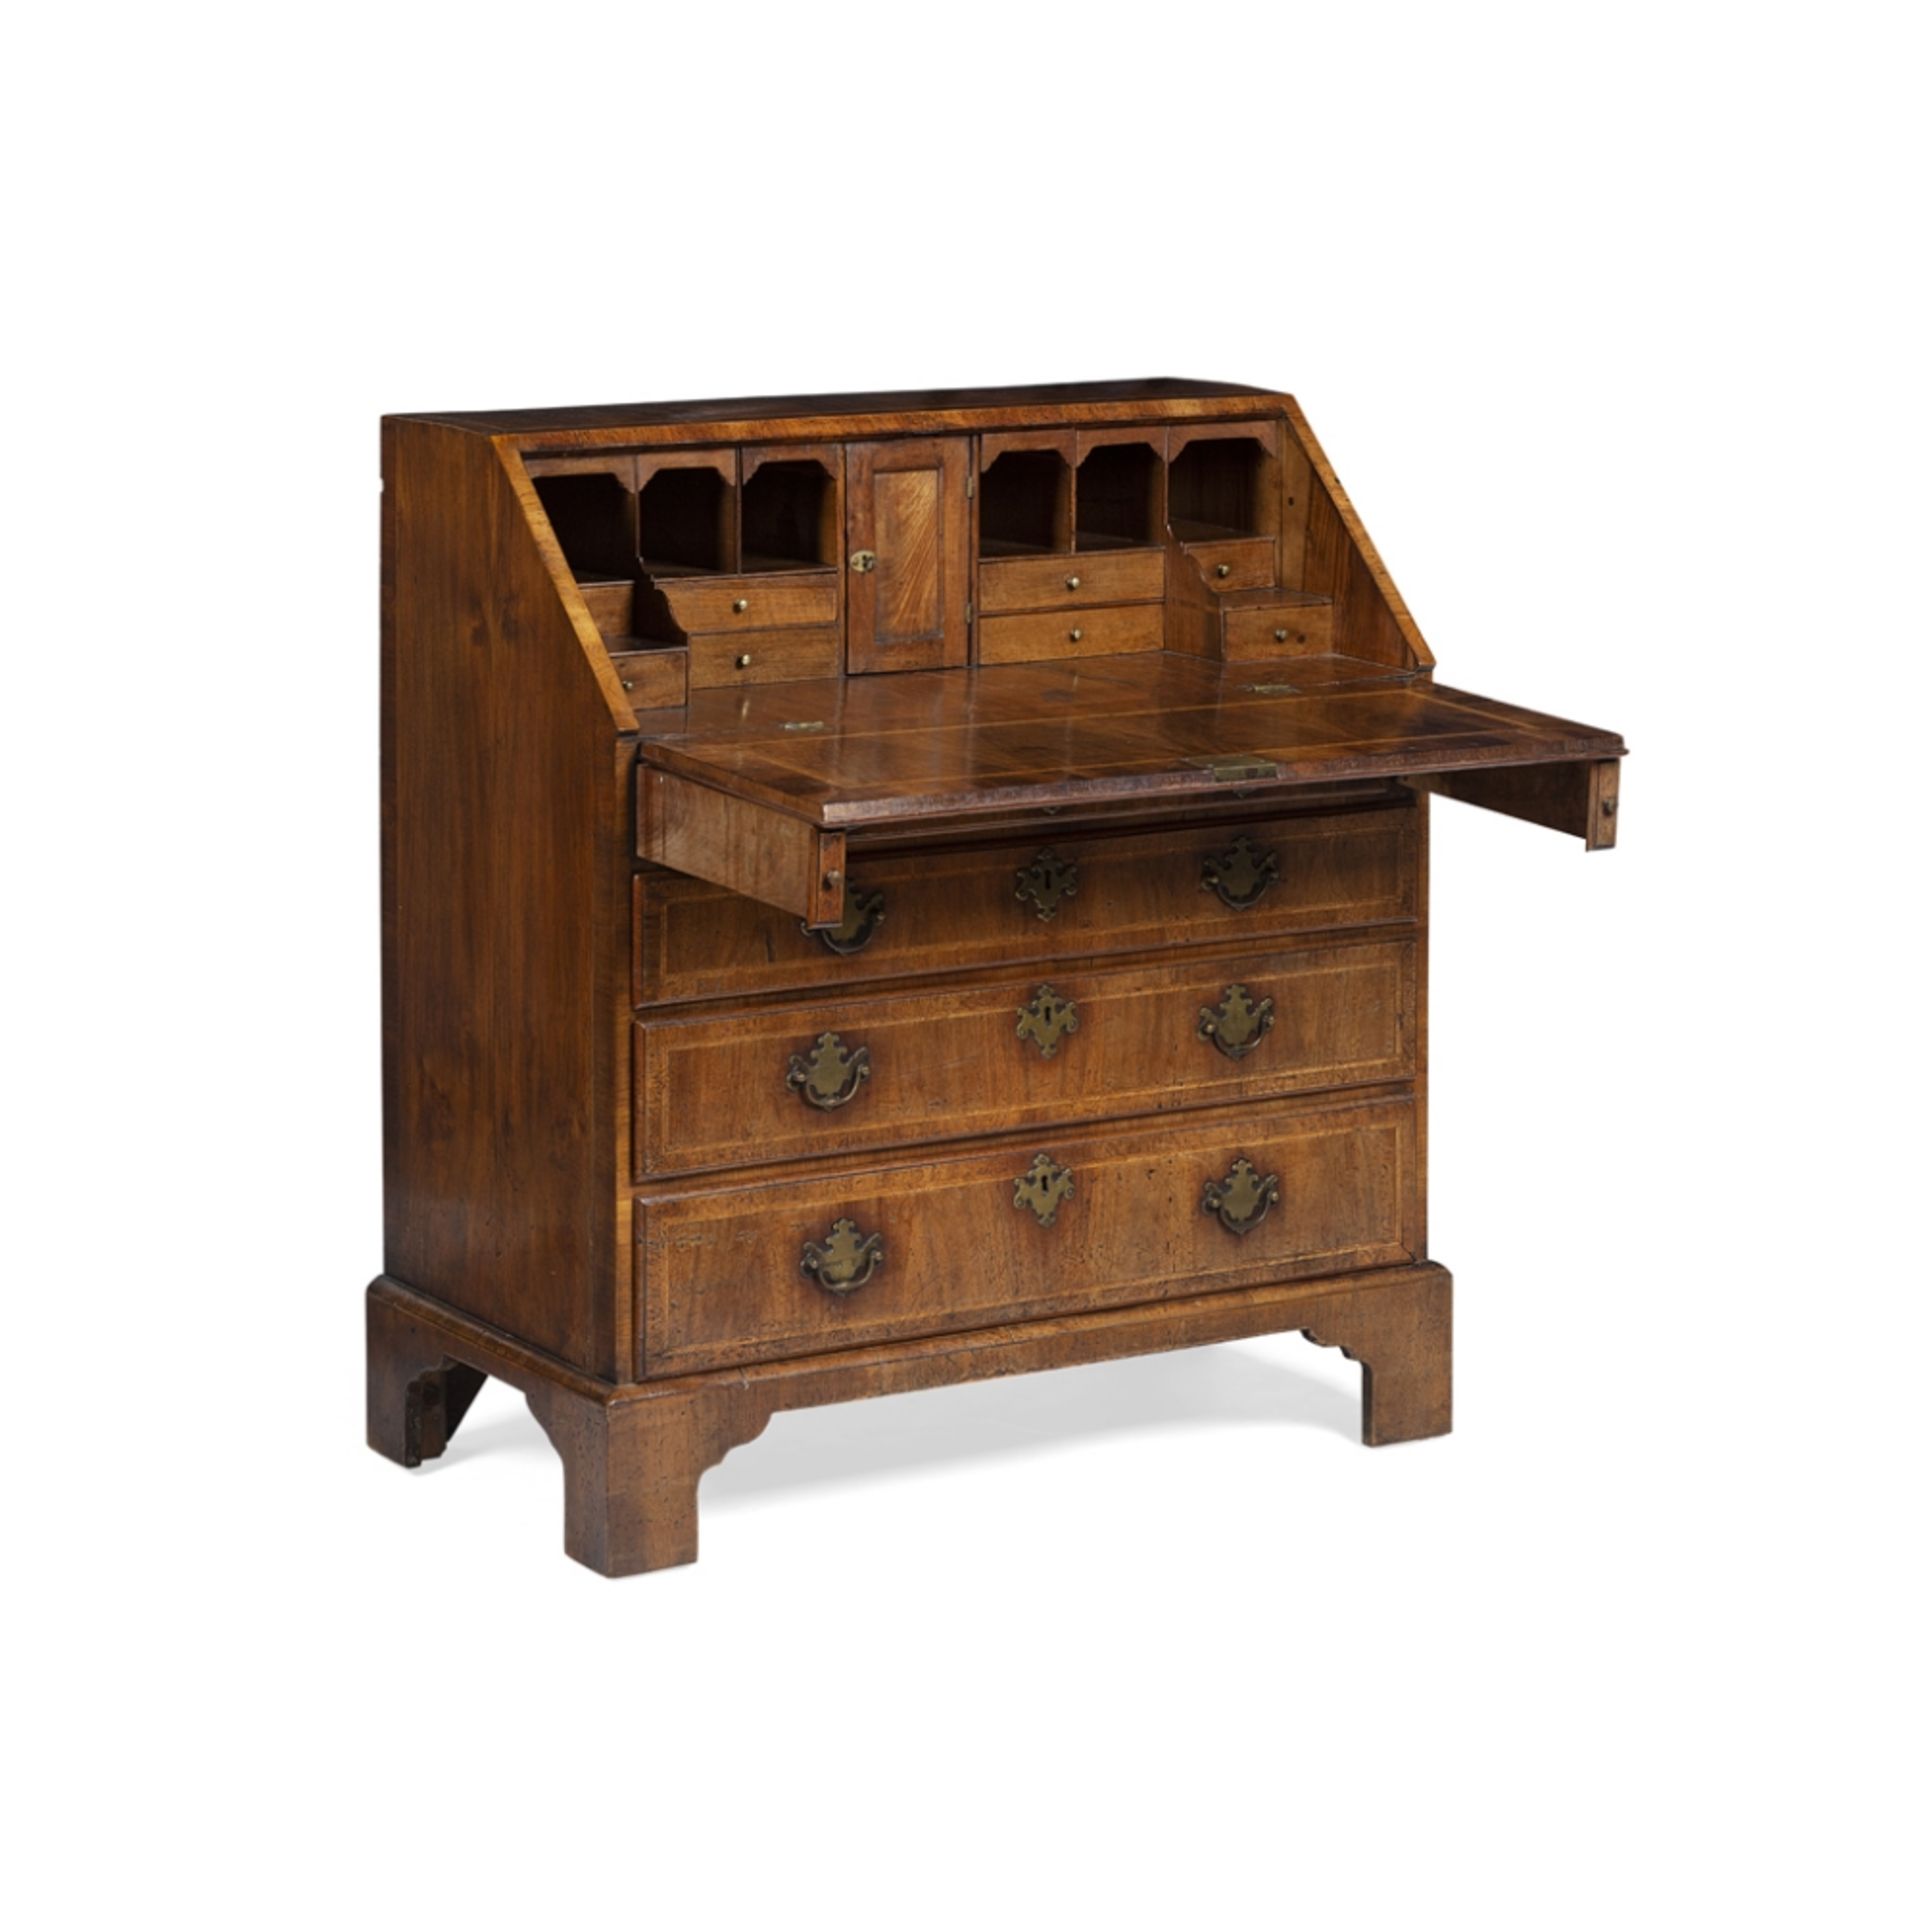 GEORGE II WALNUT BUREAU18TH CENTURY the crossbanded slant front opening to an interior fitted with - Image 2 of 2